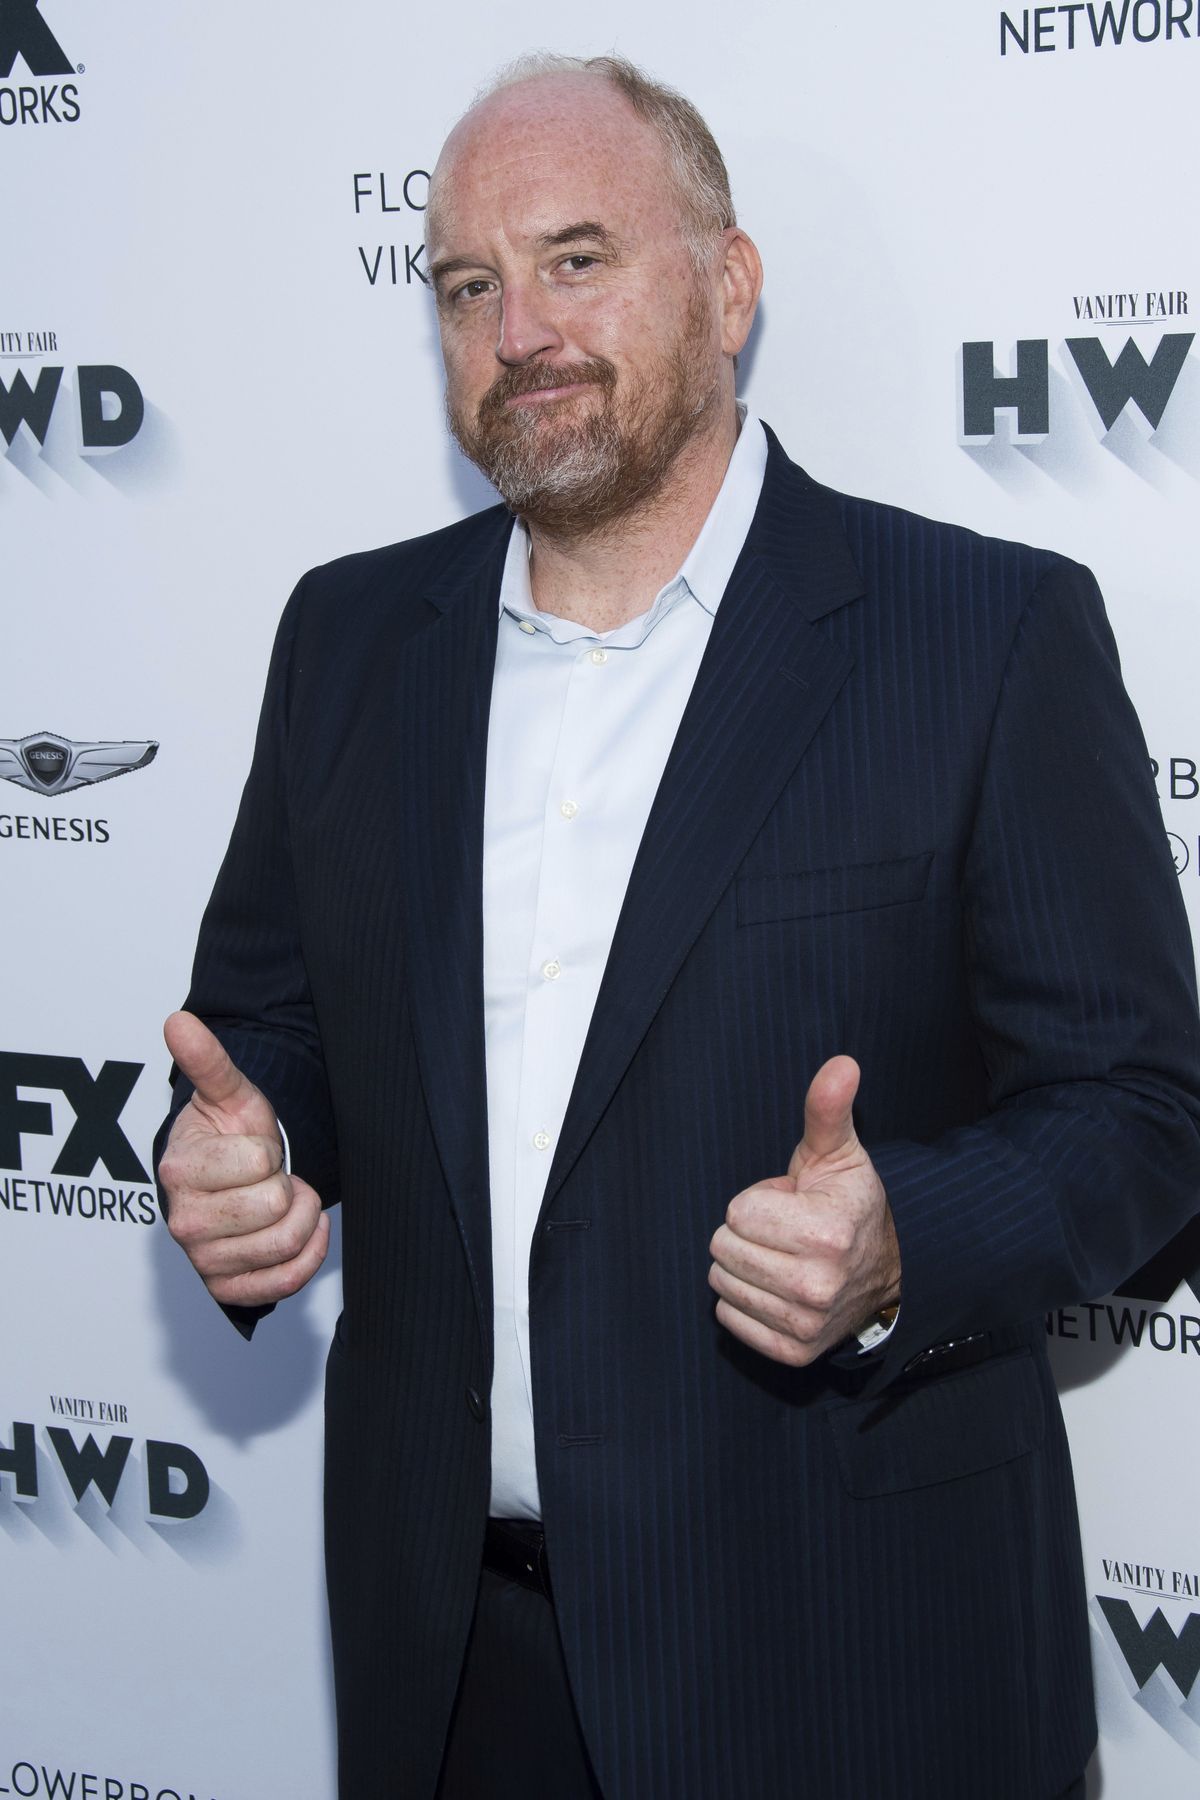 Louis C.K. attends the FX Networks and Vanity Fair pre-Emmy party at Craft on Sept. 16, 2017, in Los Angeles. Louis C.K. headlines First Interstate Center for the Arts on Sunday.  (Charles Sykes/Invision/AP)